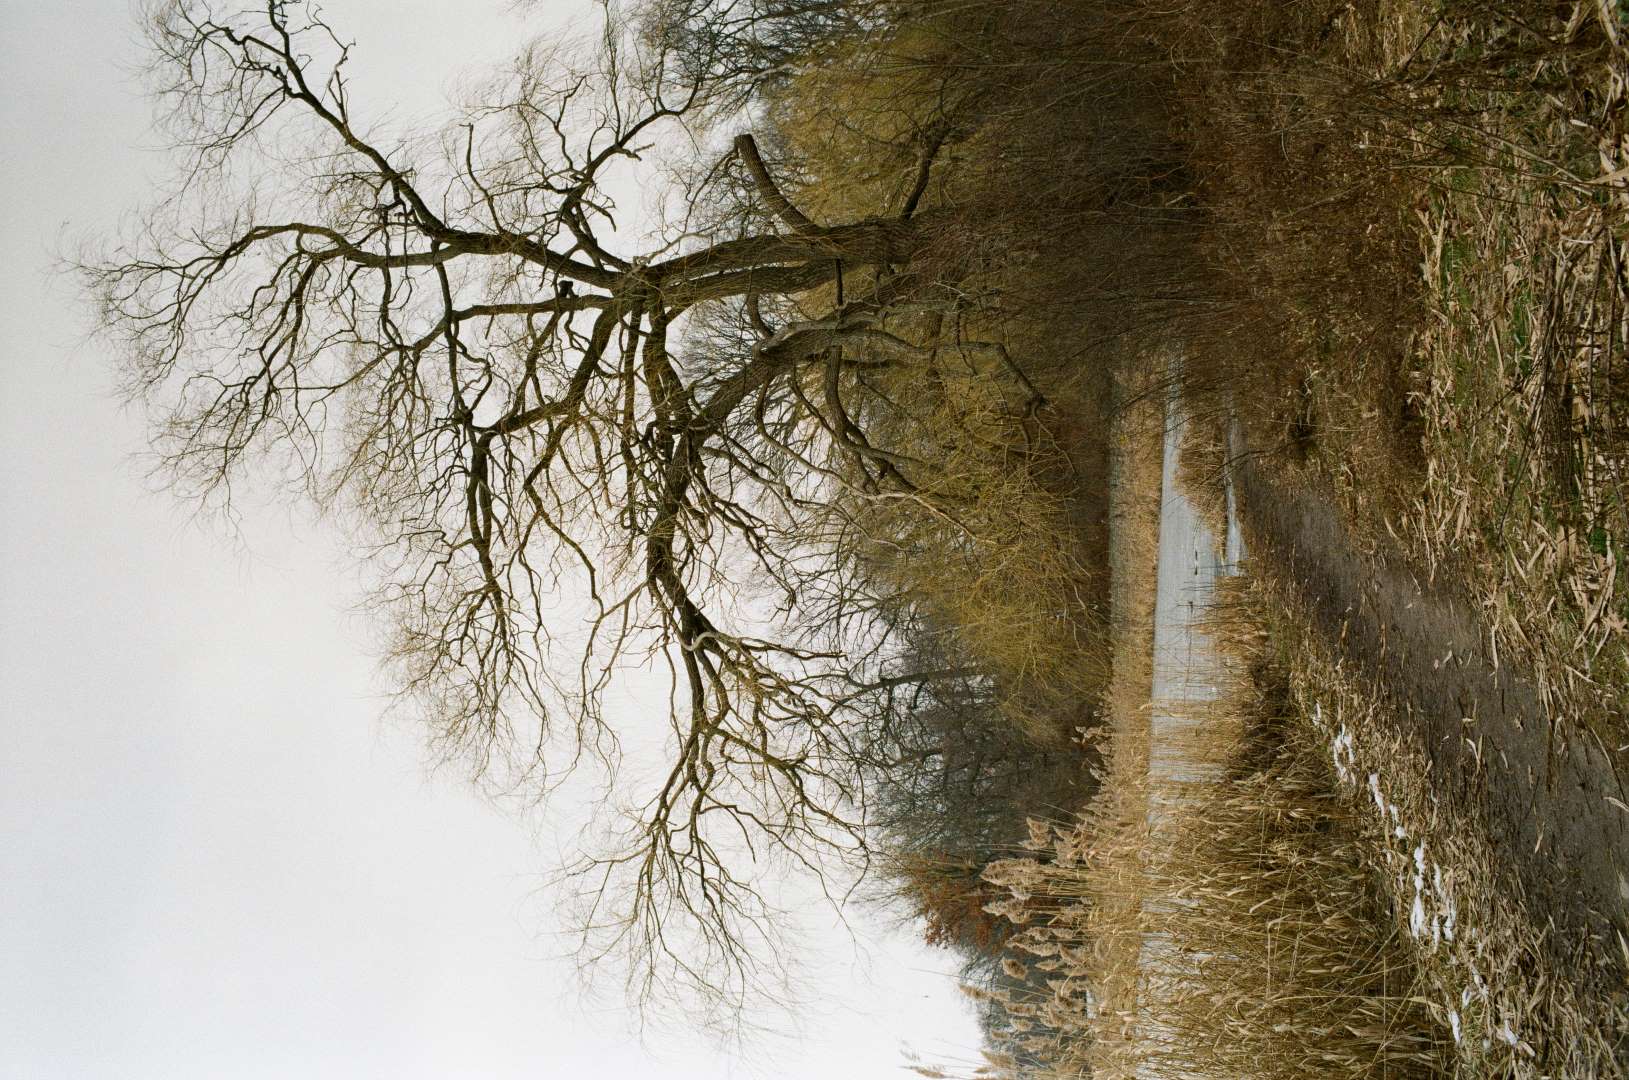 A colour photograph of a path leading to a pond with an overhanging tree. A contemplative scene